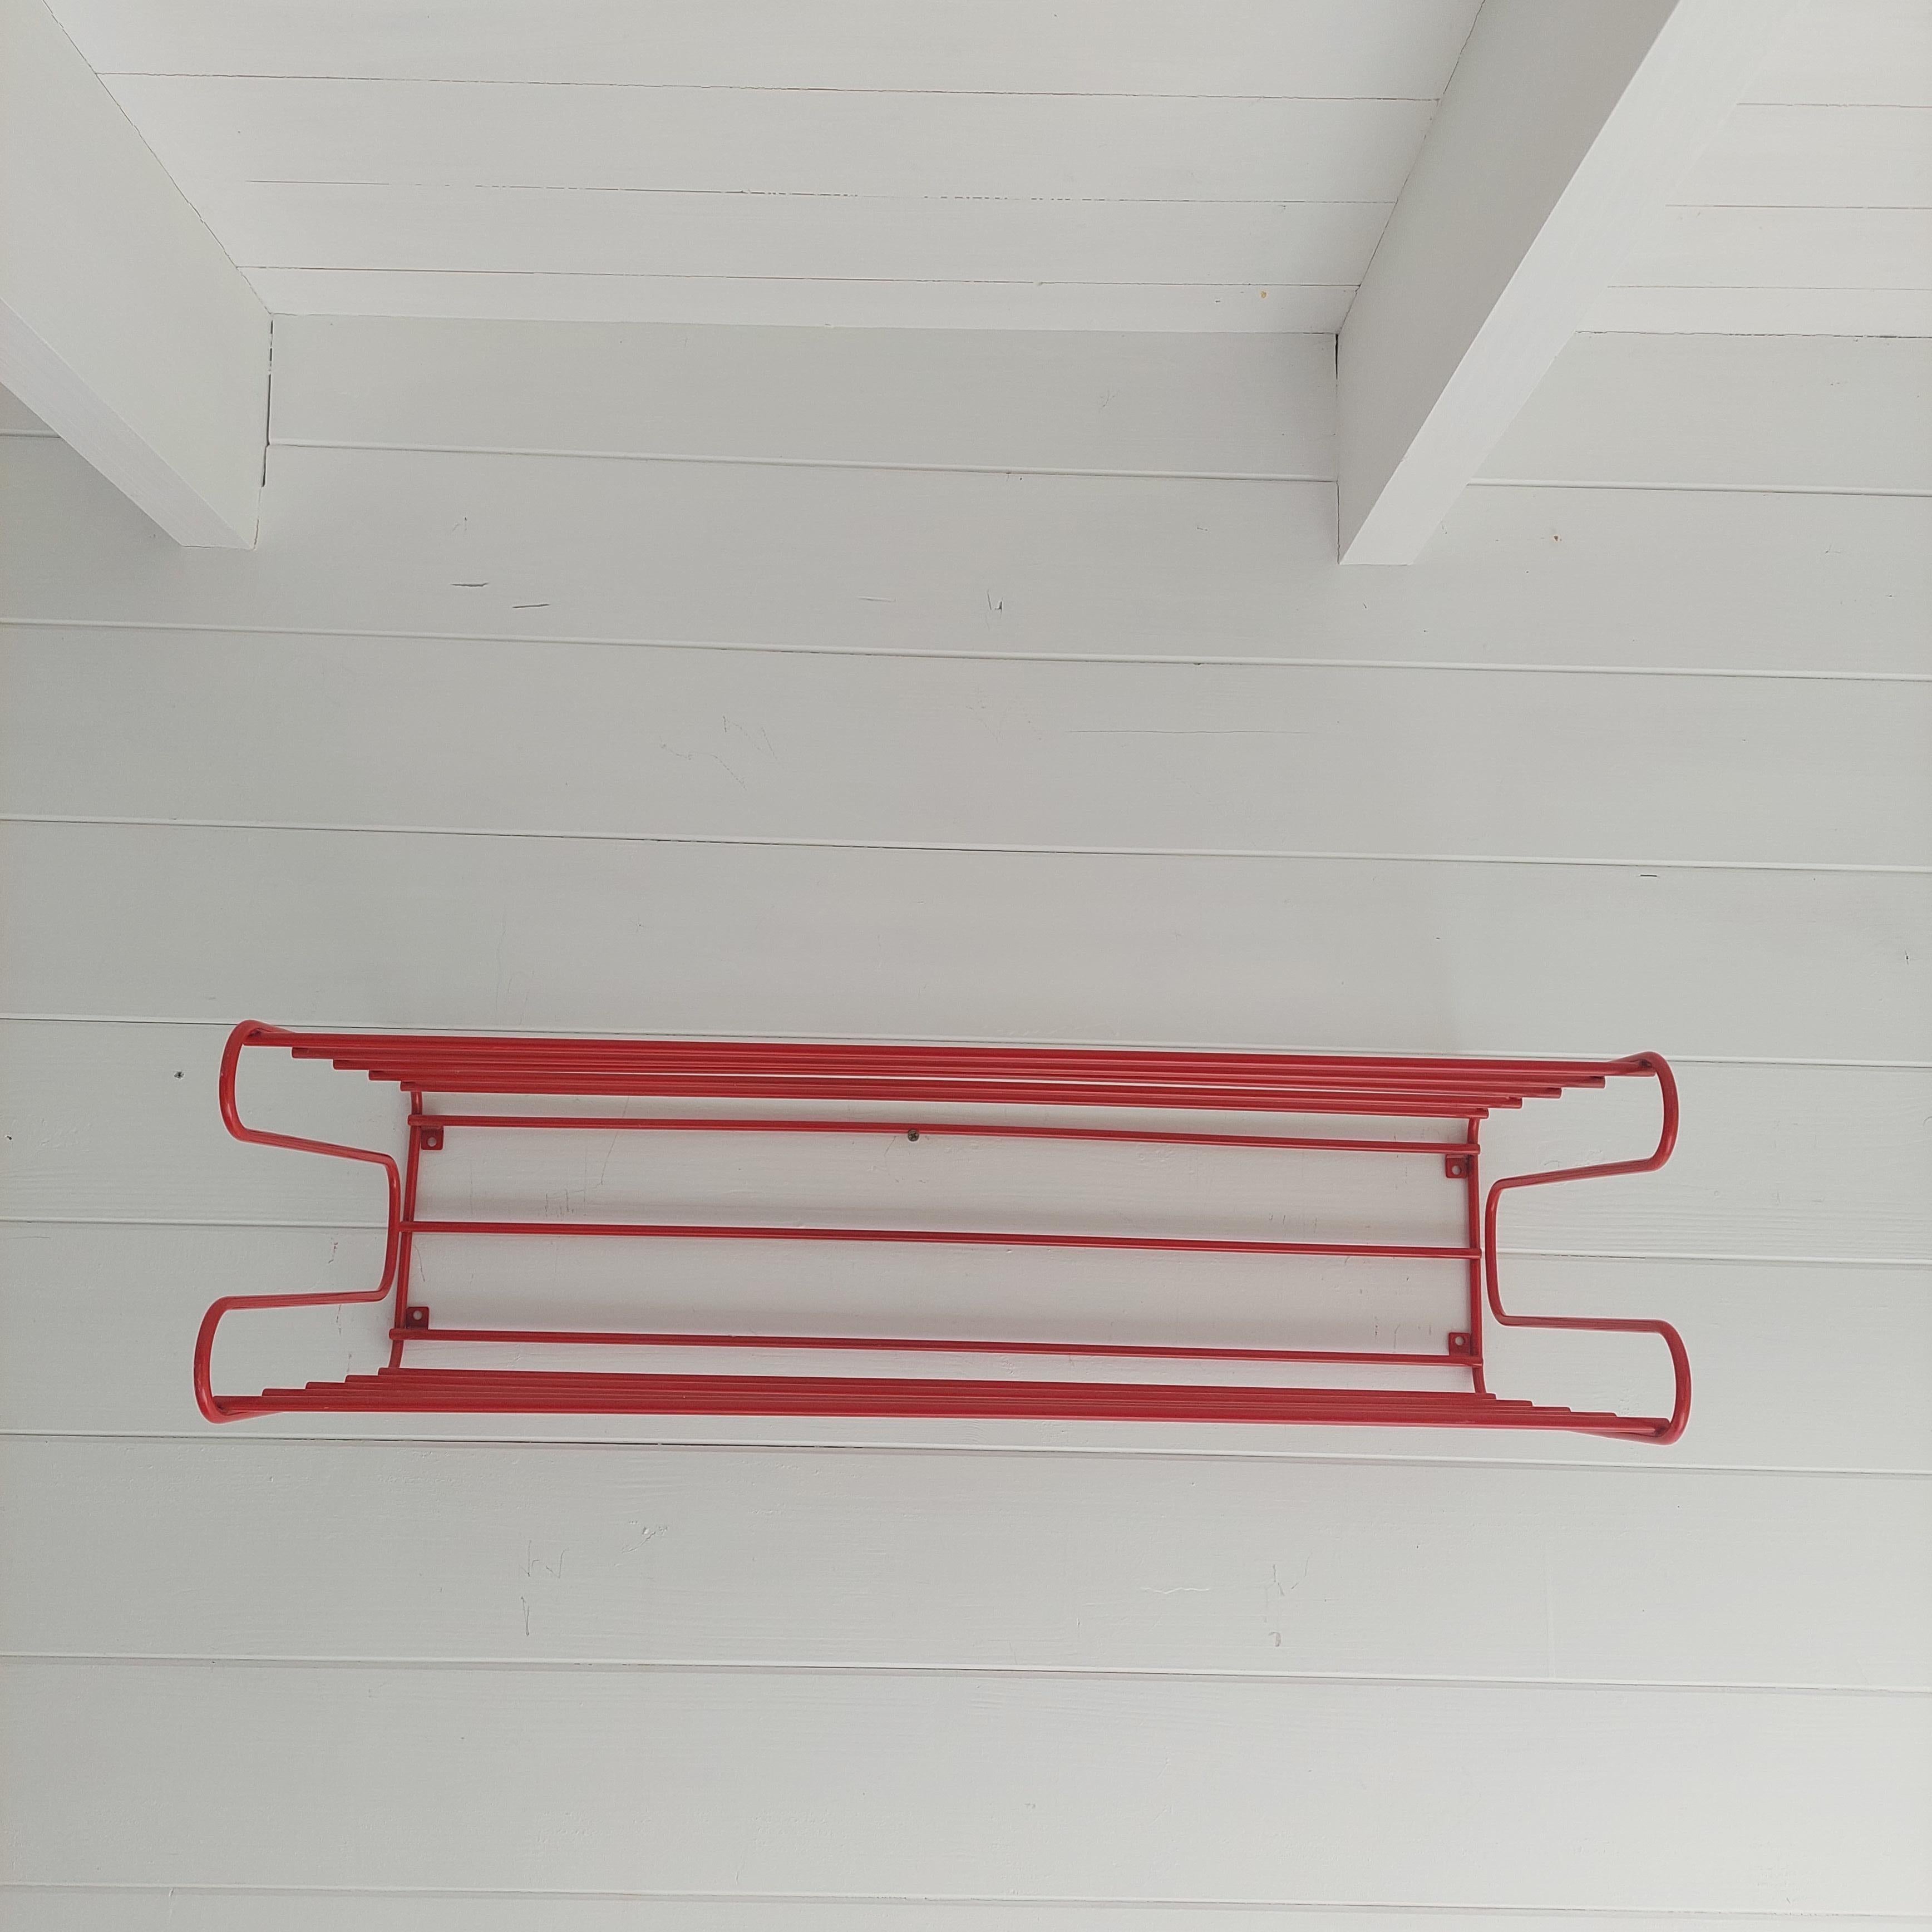 
Definitely one of IKEA’s top designs.
This wall hanging shelf is  a brilliant creation. 


This double layer wall rack is a multi purpose rack.
The open wire structures allows for a lot of creativity.

The graphic design is amazing. It looks like